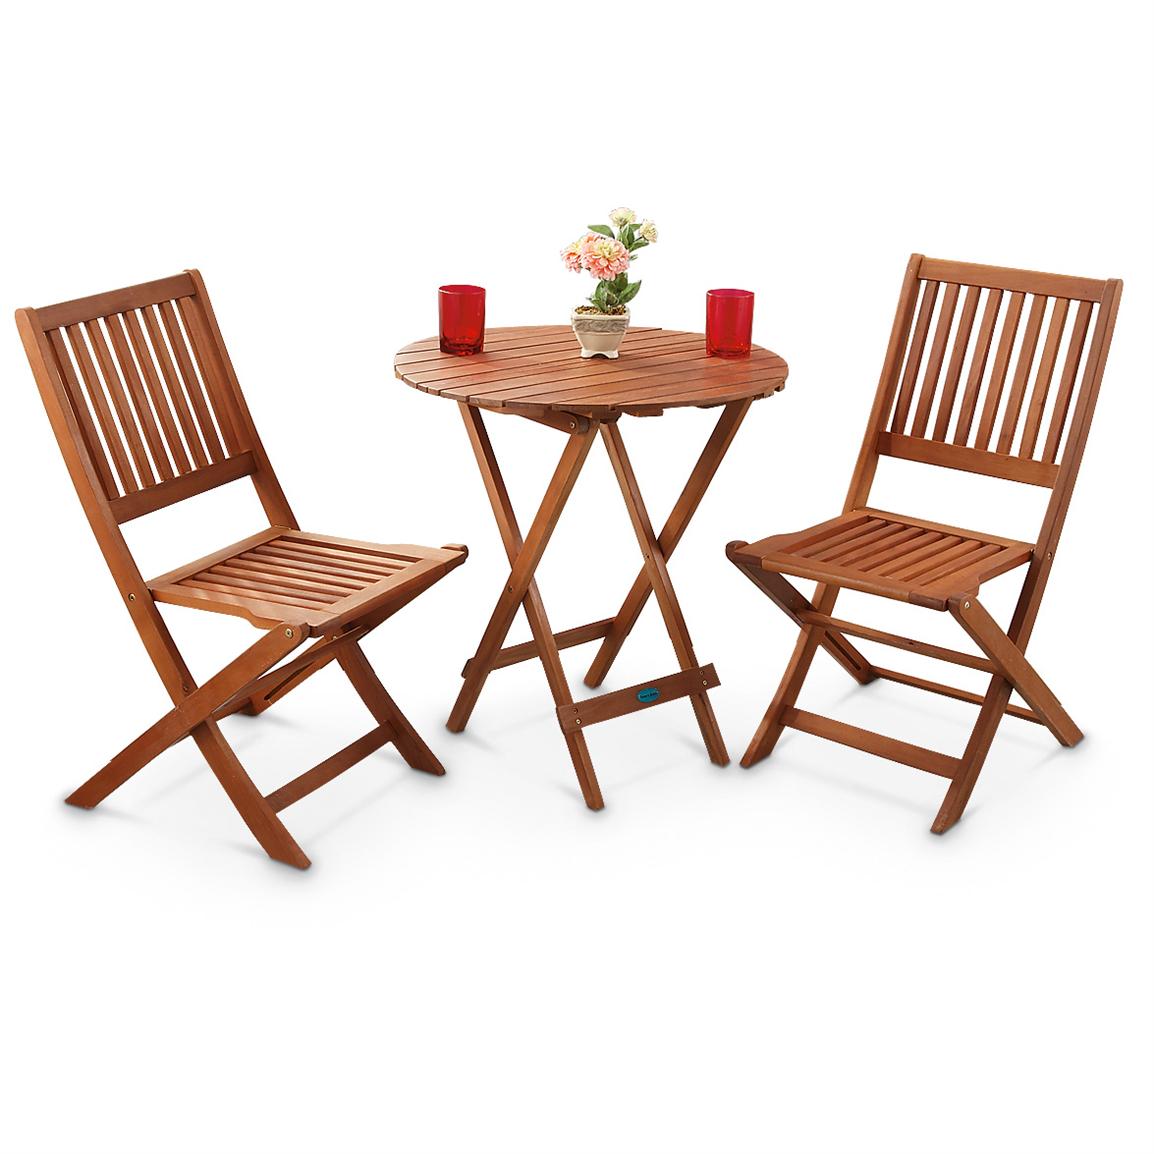 3 - Pc. Outdoor Folding Table and Chairs Set - 283209, Patio Furniture